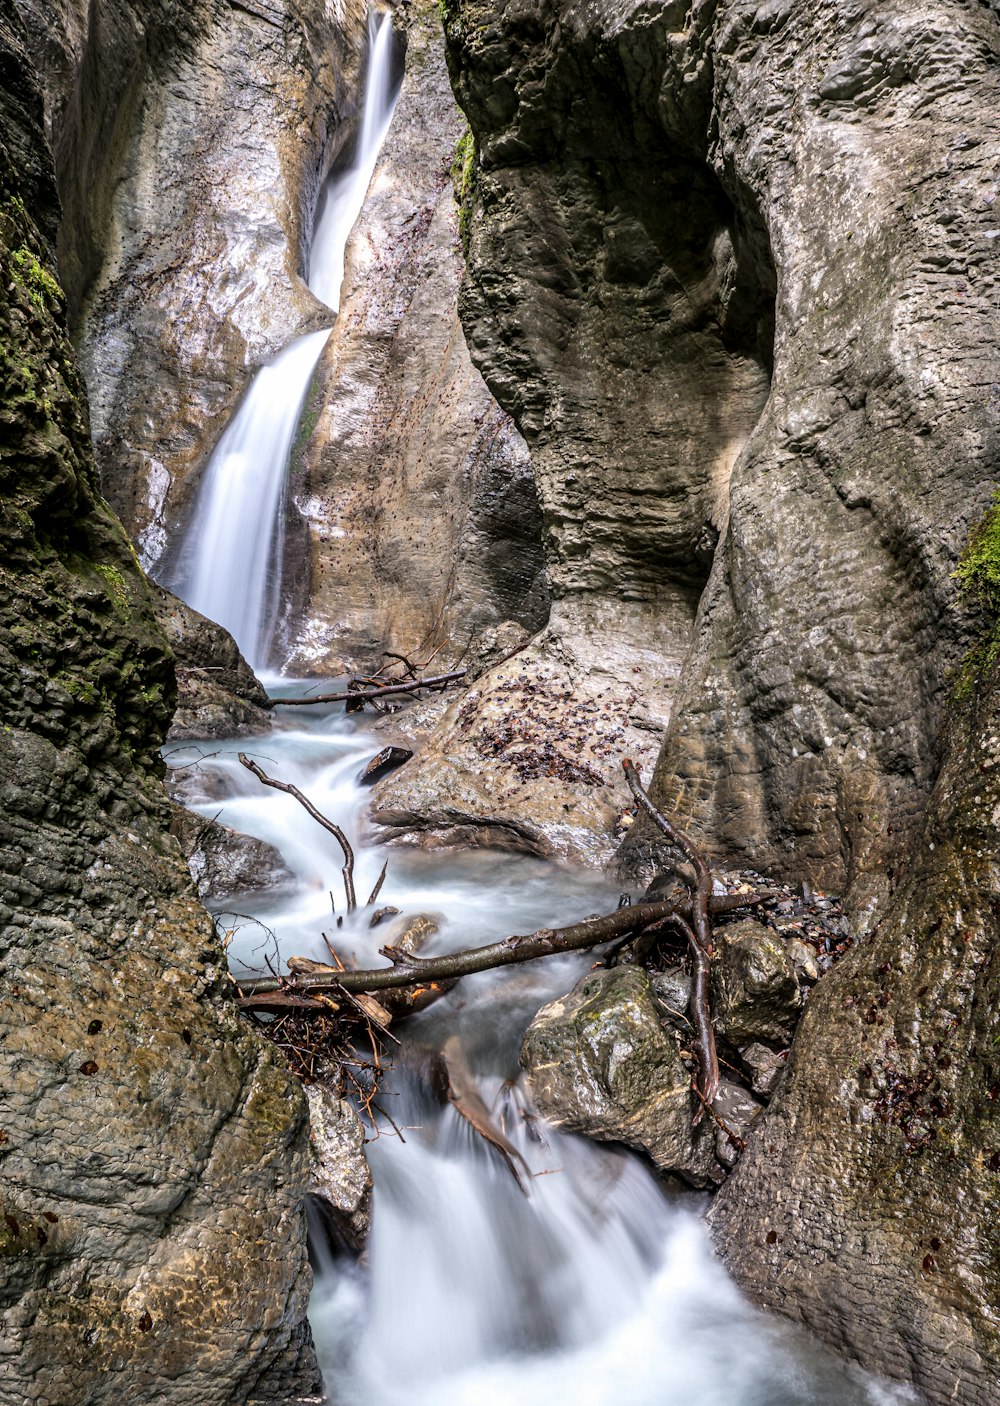 water falls between brown and green rock formation during daytime